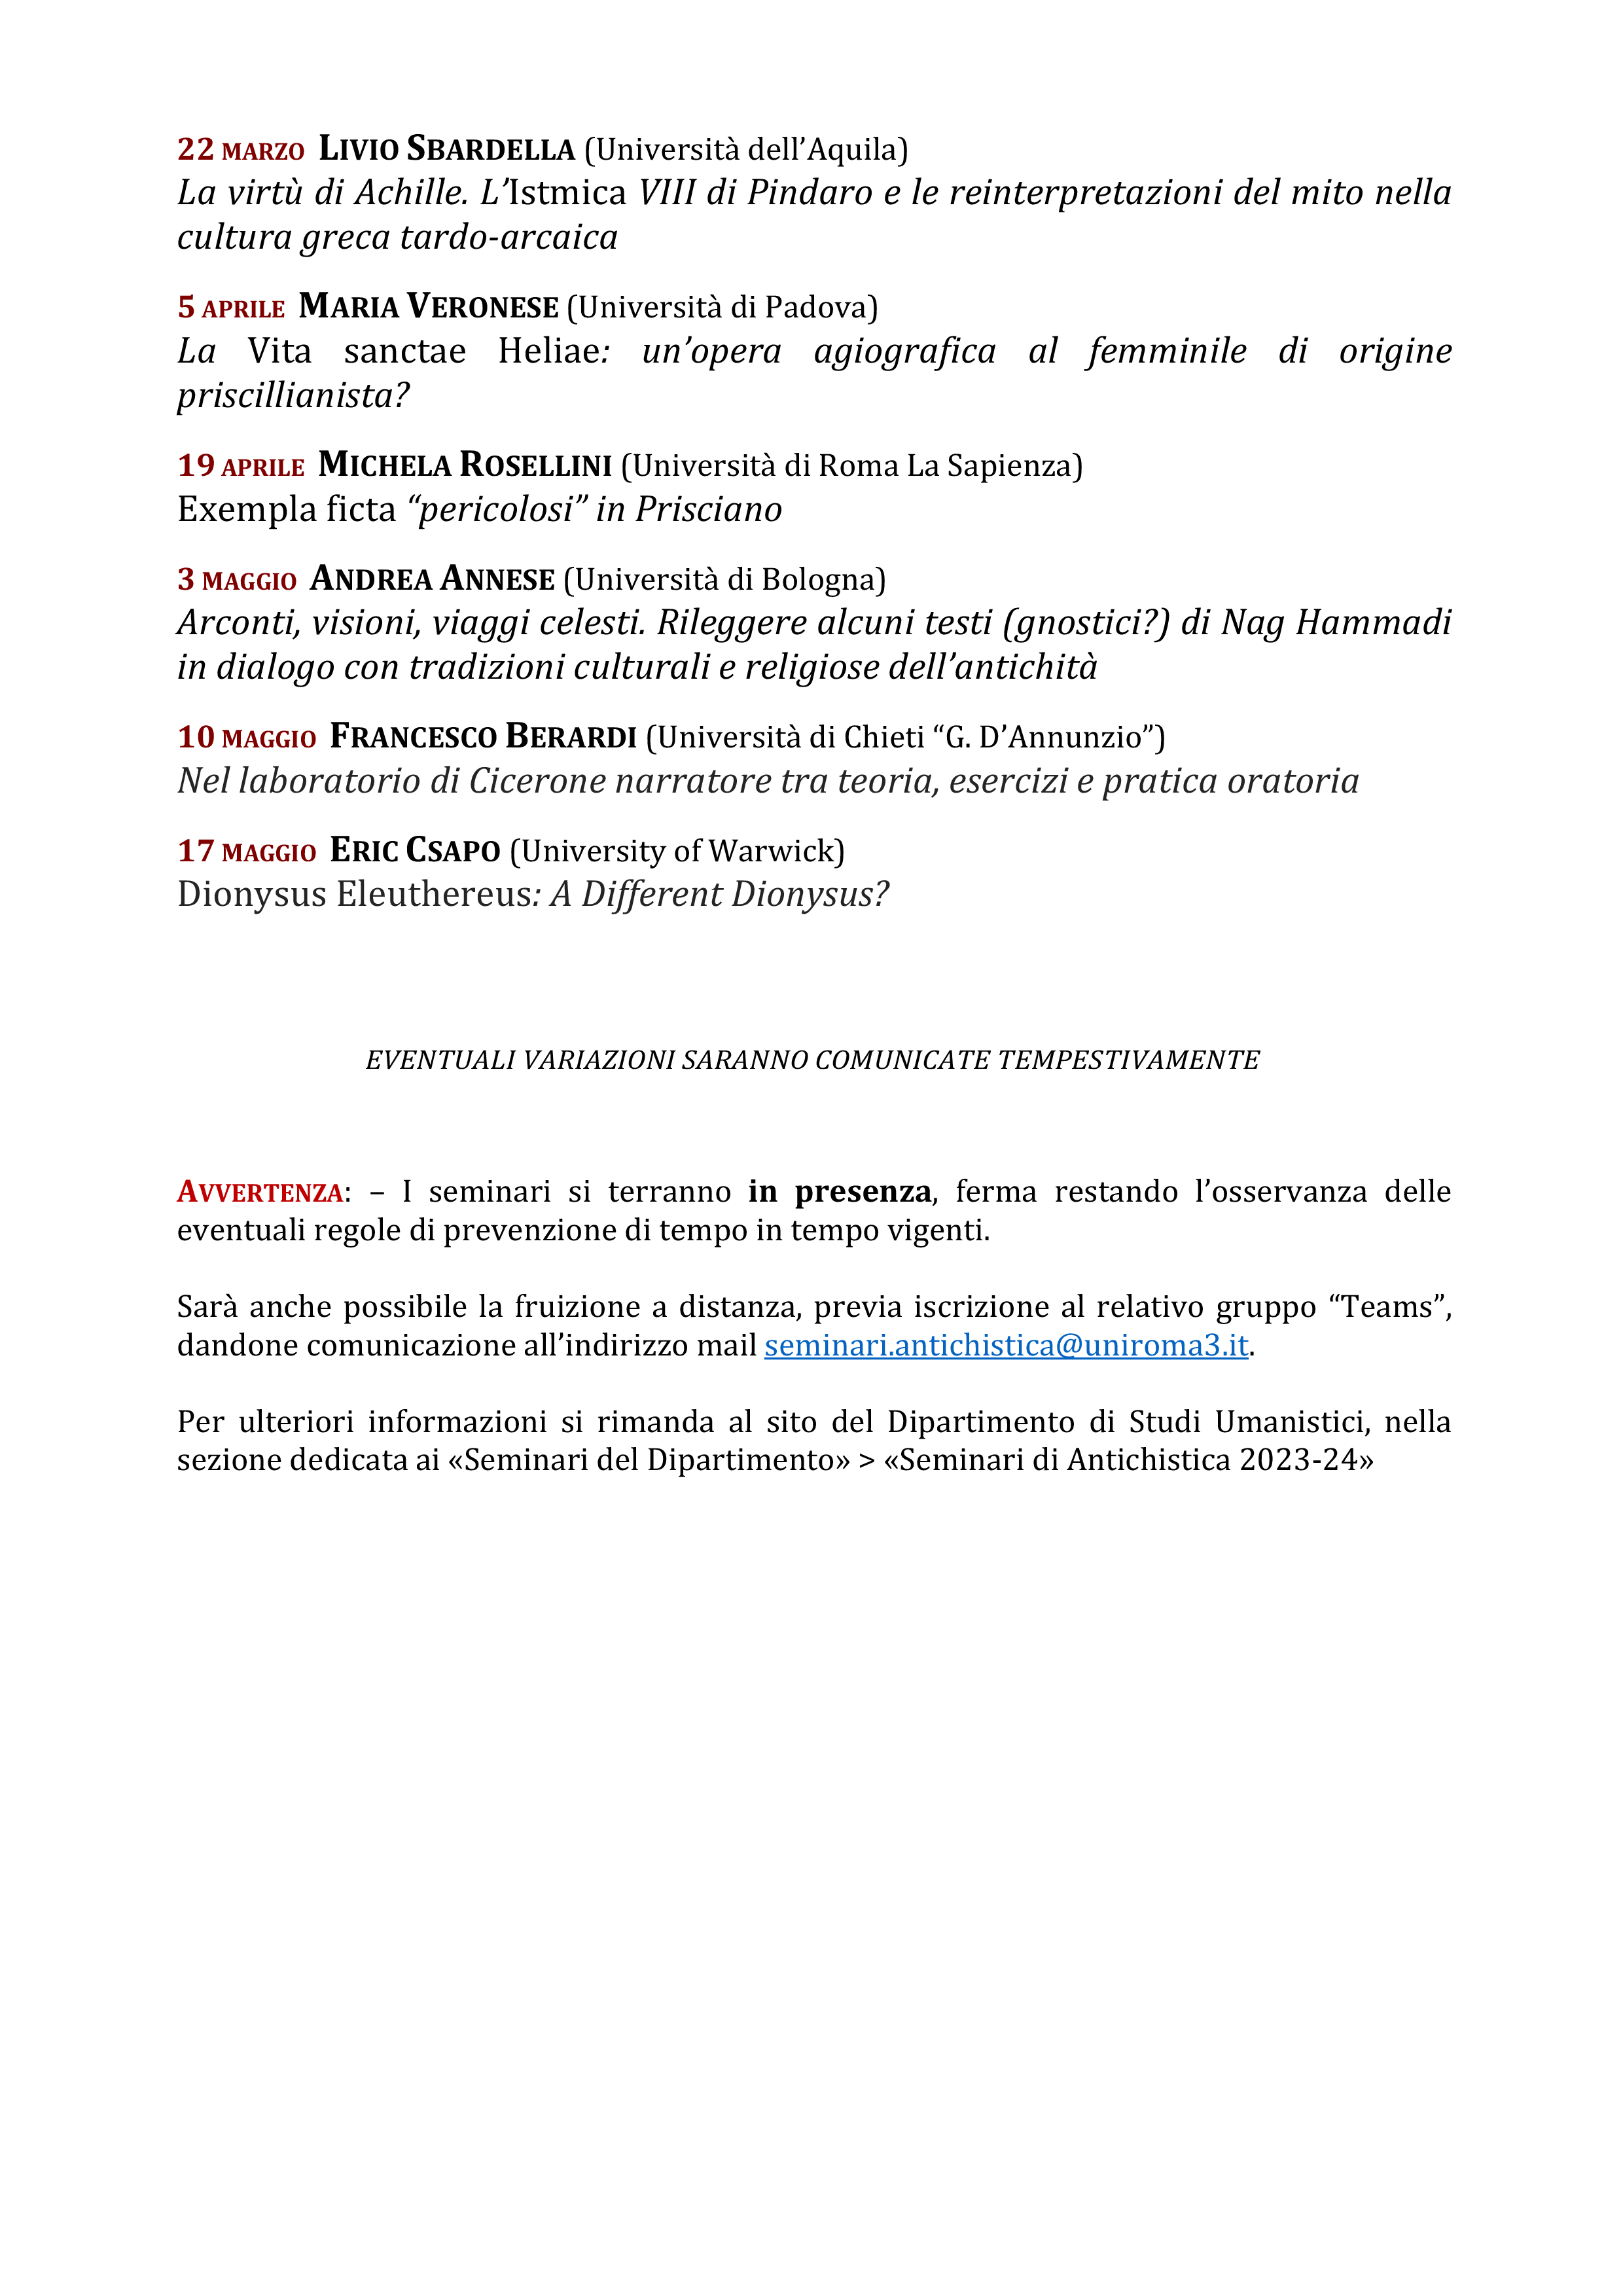 Poster for the Seminars on Antiquity at Roma Tre